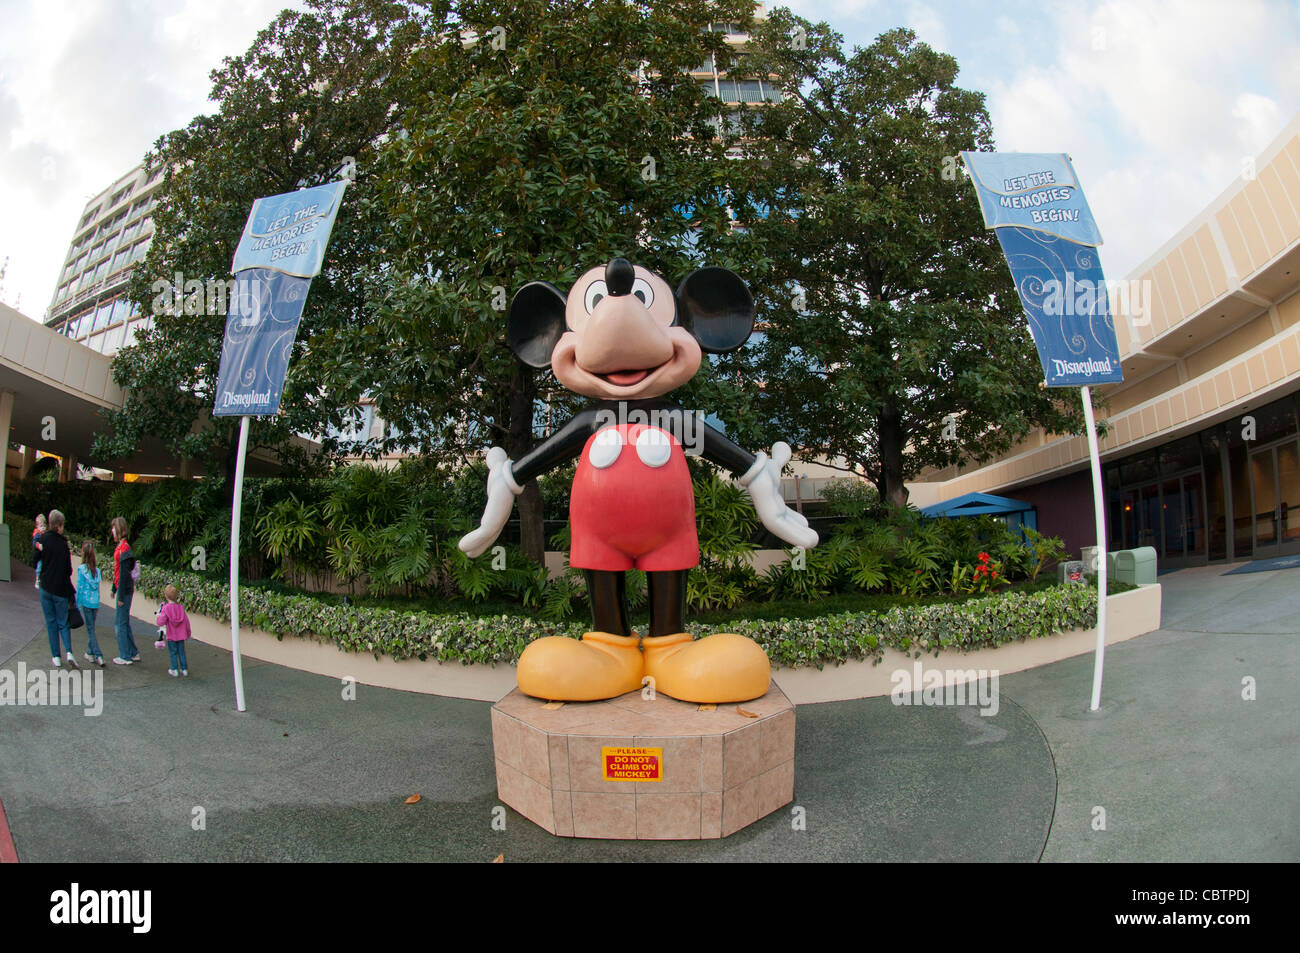 Notorious cartoon character Mickey Mouse statue in Disneyworld hotel, Anaheim, US Stock Photo